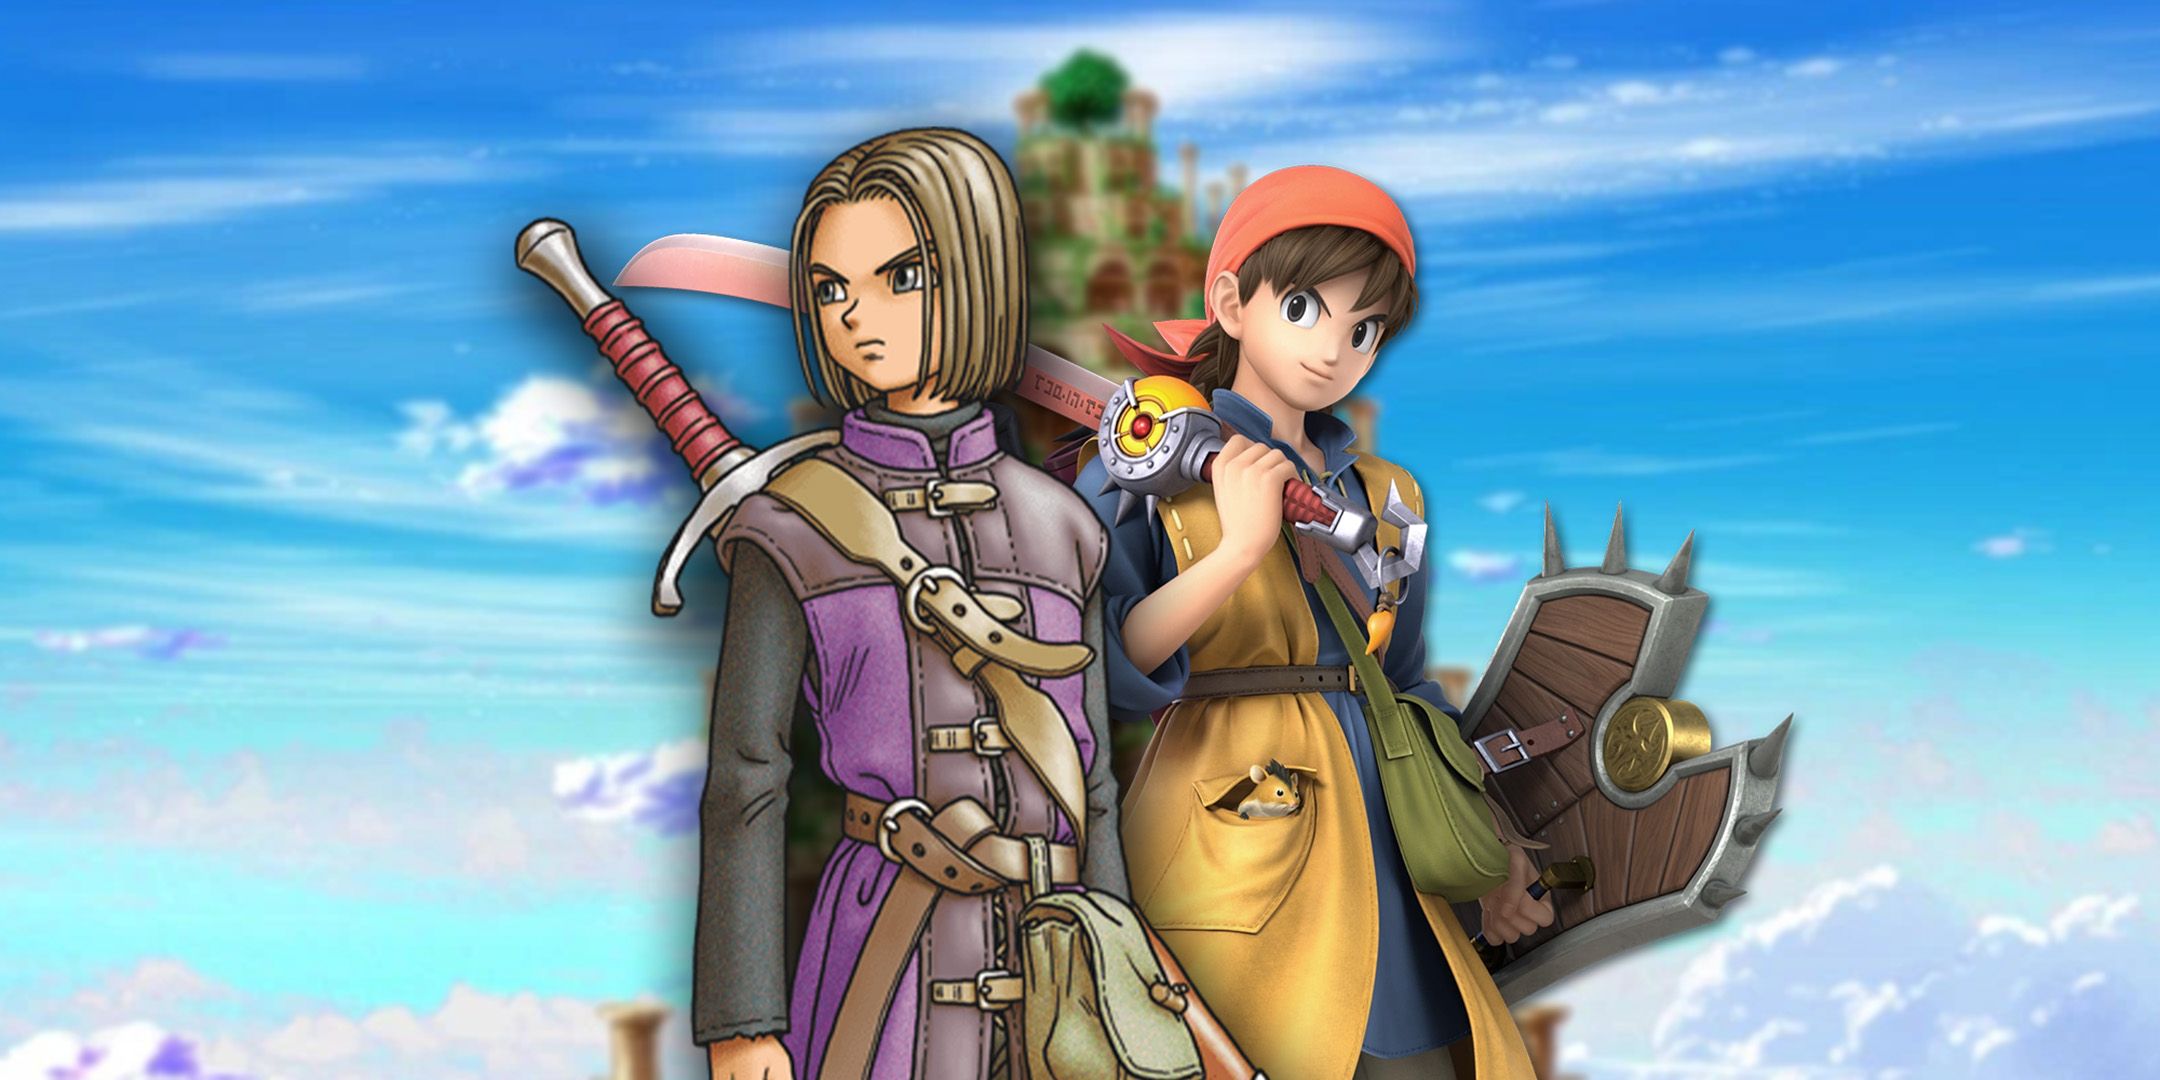 Dragon Quest 8 Hero and the Luminary standing beside each other against a background of sky and a temple